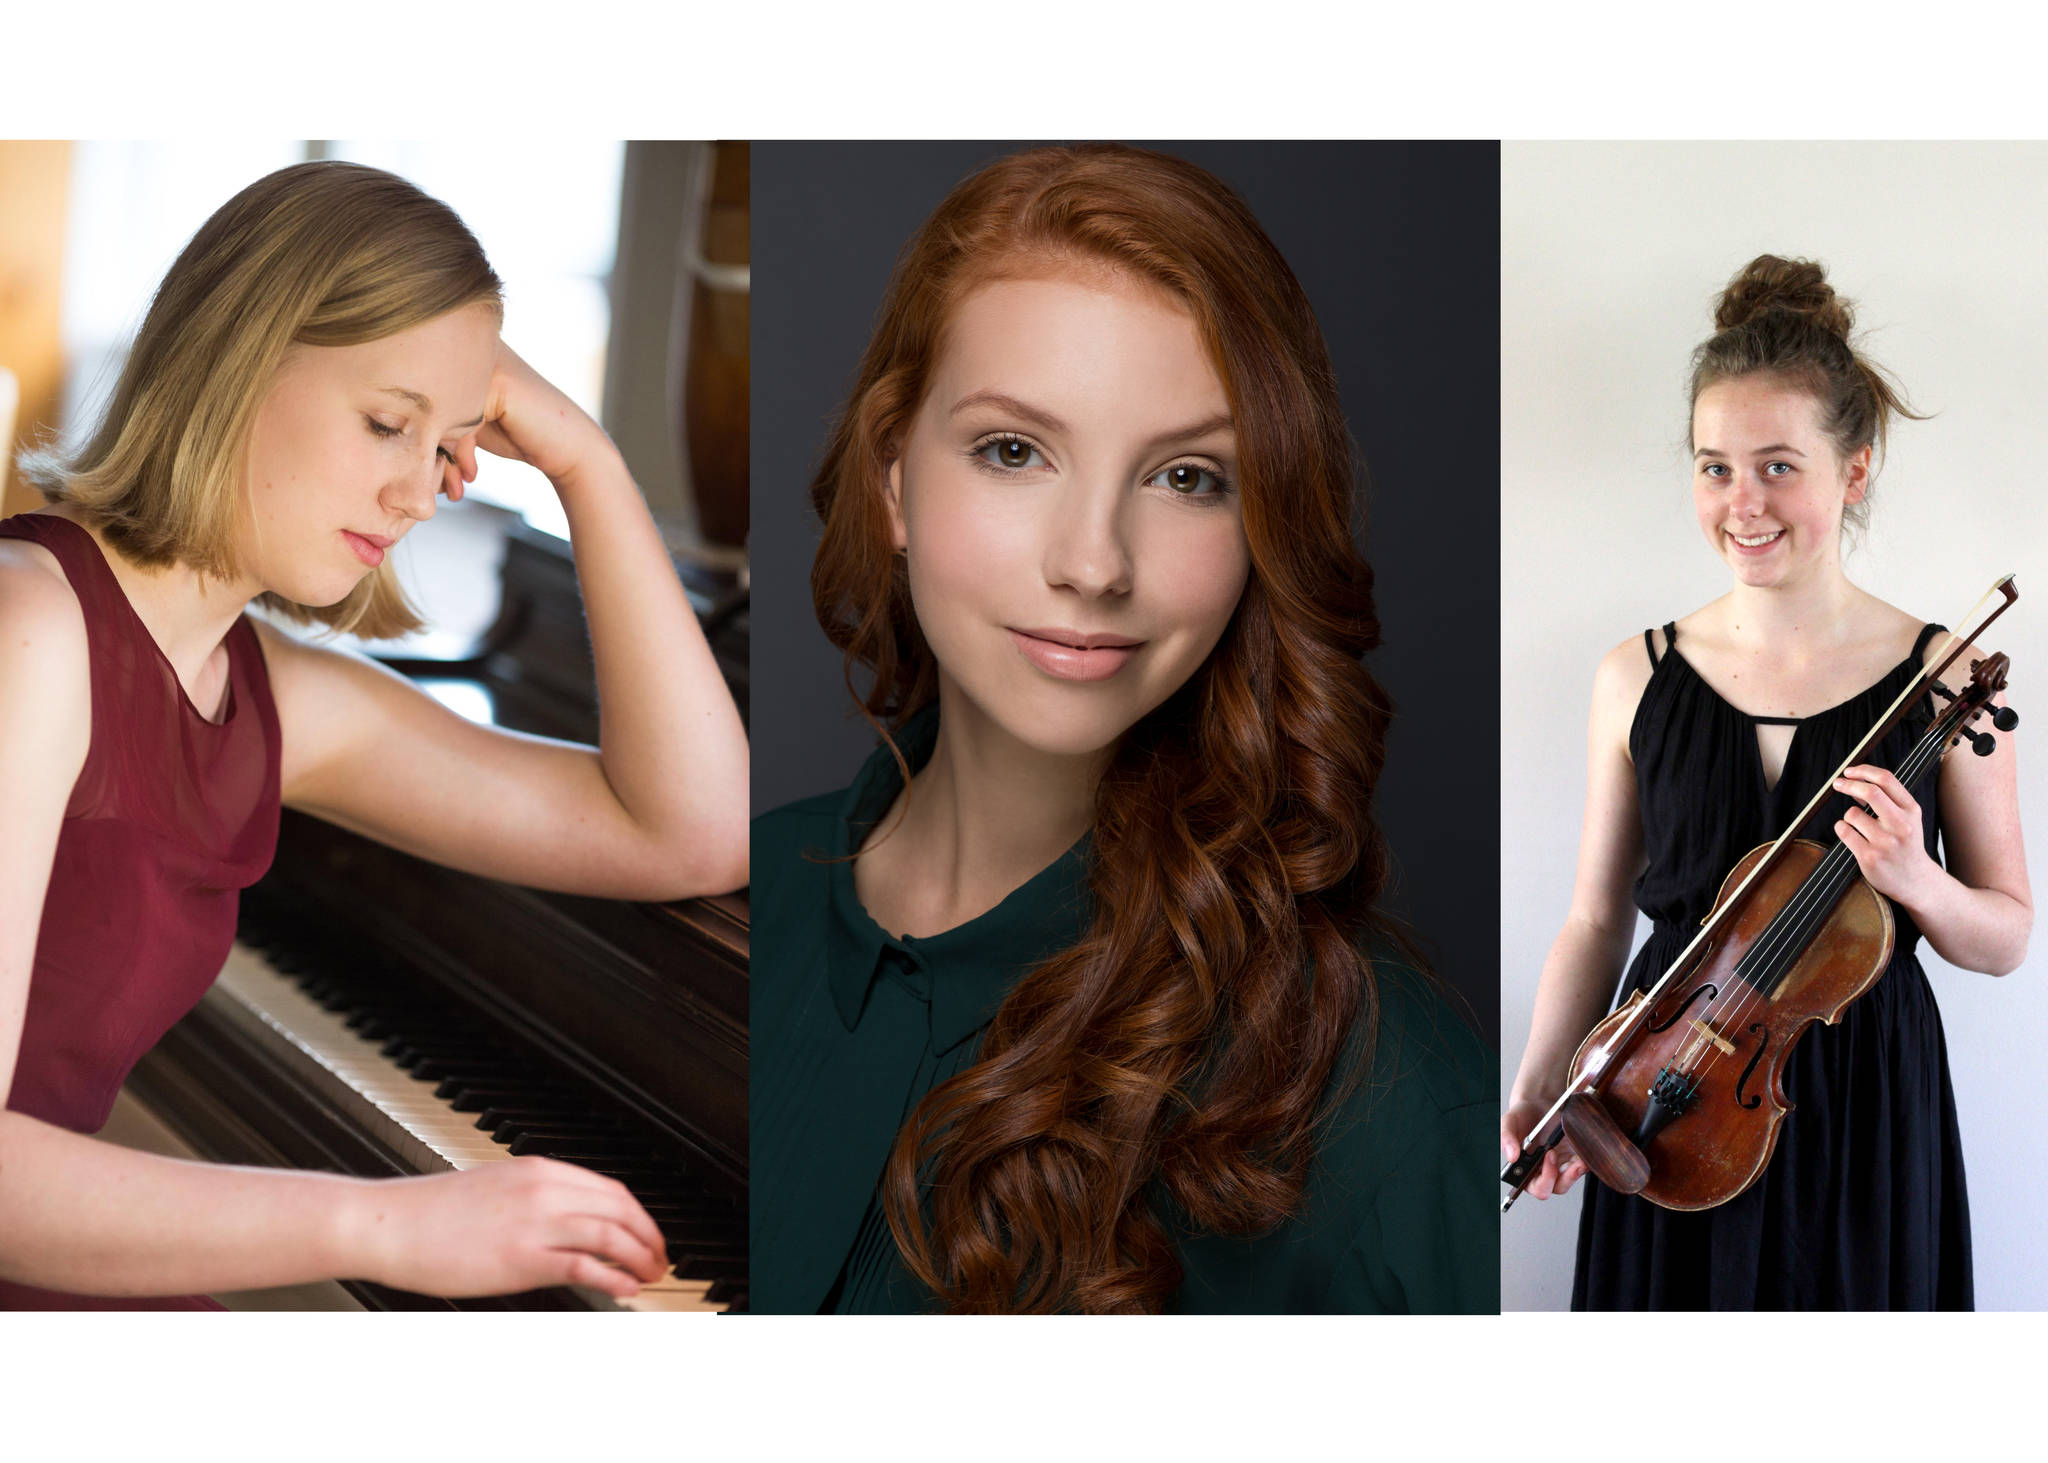 Rachel Glessing, Shaughnessy O’Brien and Elizabeth Wyse earned bursaries from the Vernon and District Performing Arts Centre Society. (Contributed)